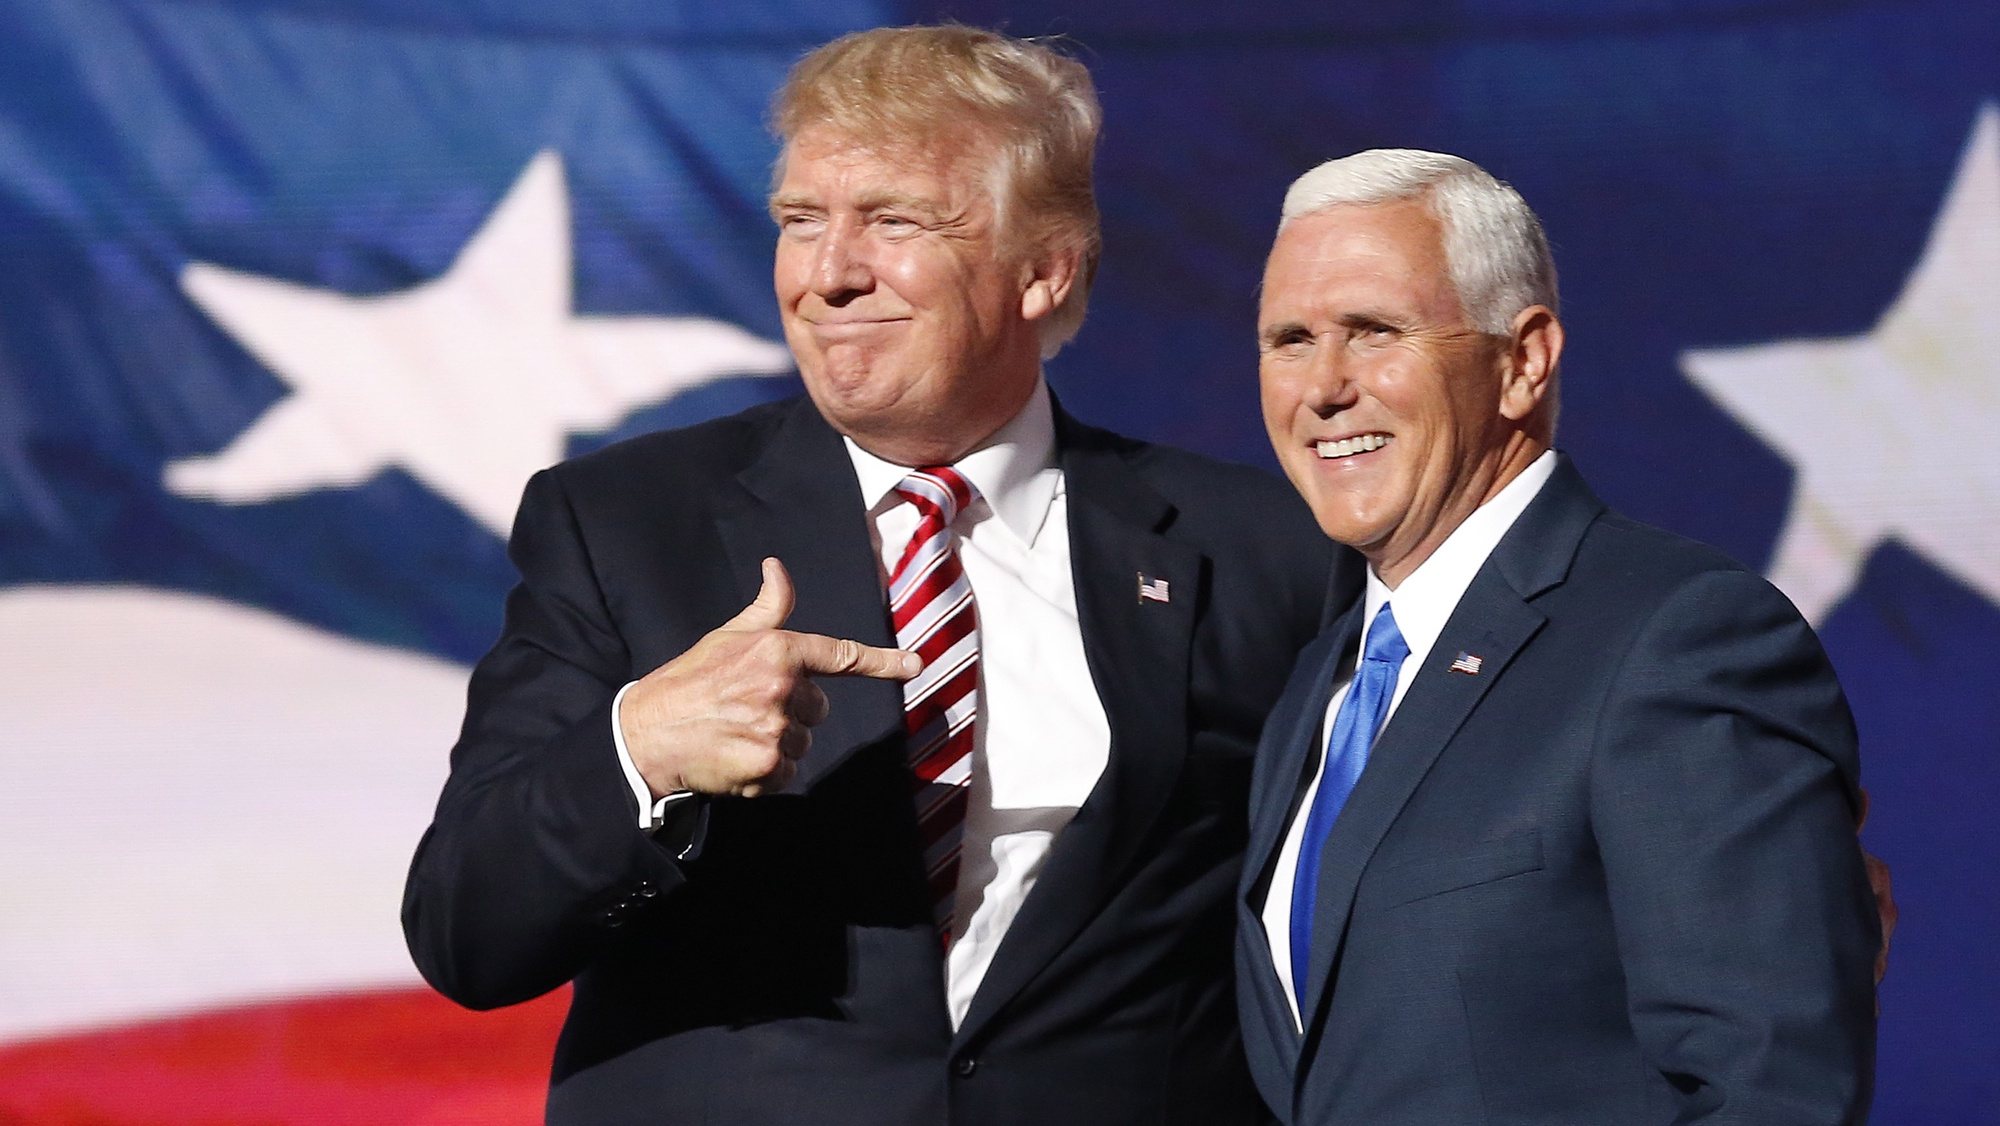 epa08939628 (FILE) Republican Presidential nominee Donald J. Trump (L) embraces Indiana Governor and Republican Vice Presidential nominee Mike Pence (R) during the third day of the 2016 Republican National Convention at Quicken Loans Arena in Cleveland, Ohio, USA, 20 July 2016. The four-day convention ended with Donald Trump formally accepting the nomination of the Republican Party as their presidential candidate in the 2016 election. The presidency of Donald Trump, which records two presidential impeachments, will end at noon on 20 January 2021.  EPA/MICHAEL REYNOLDS *** Local Caption *** 53089650